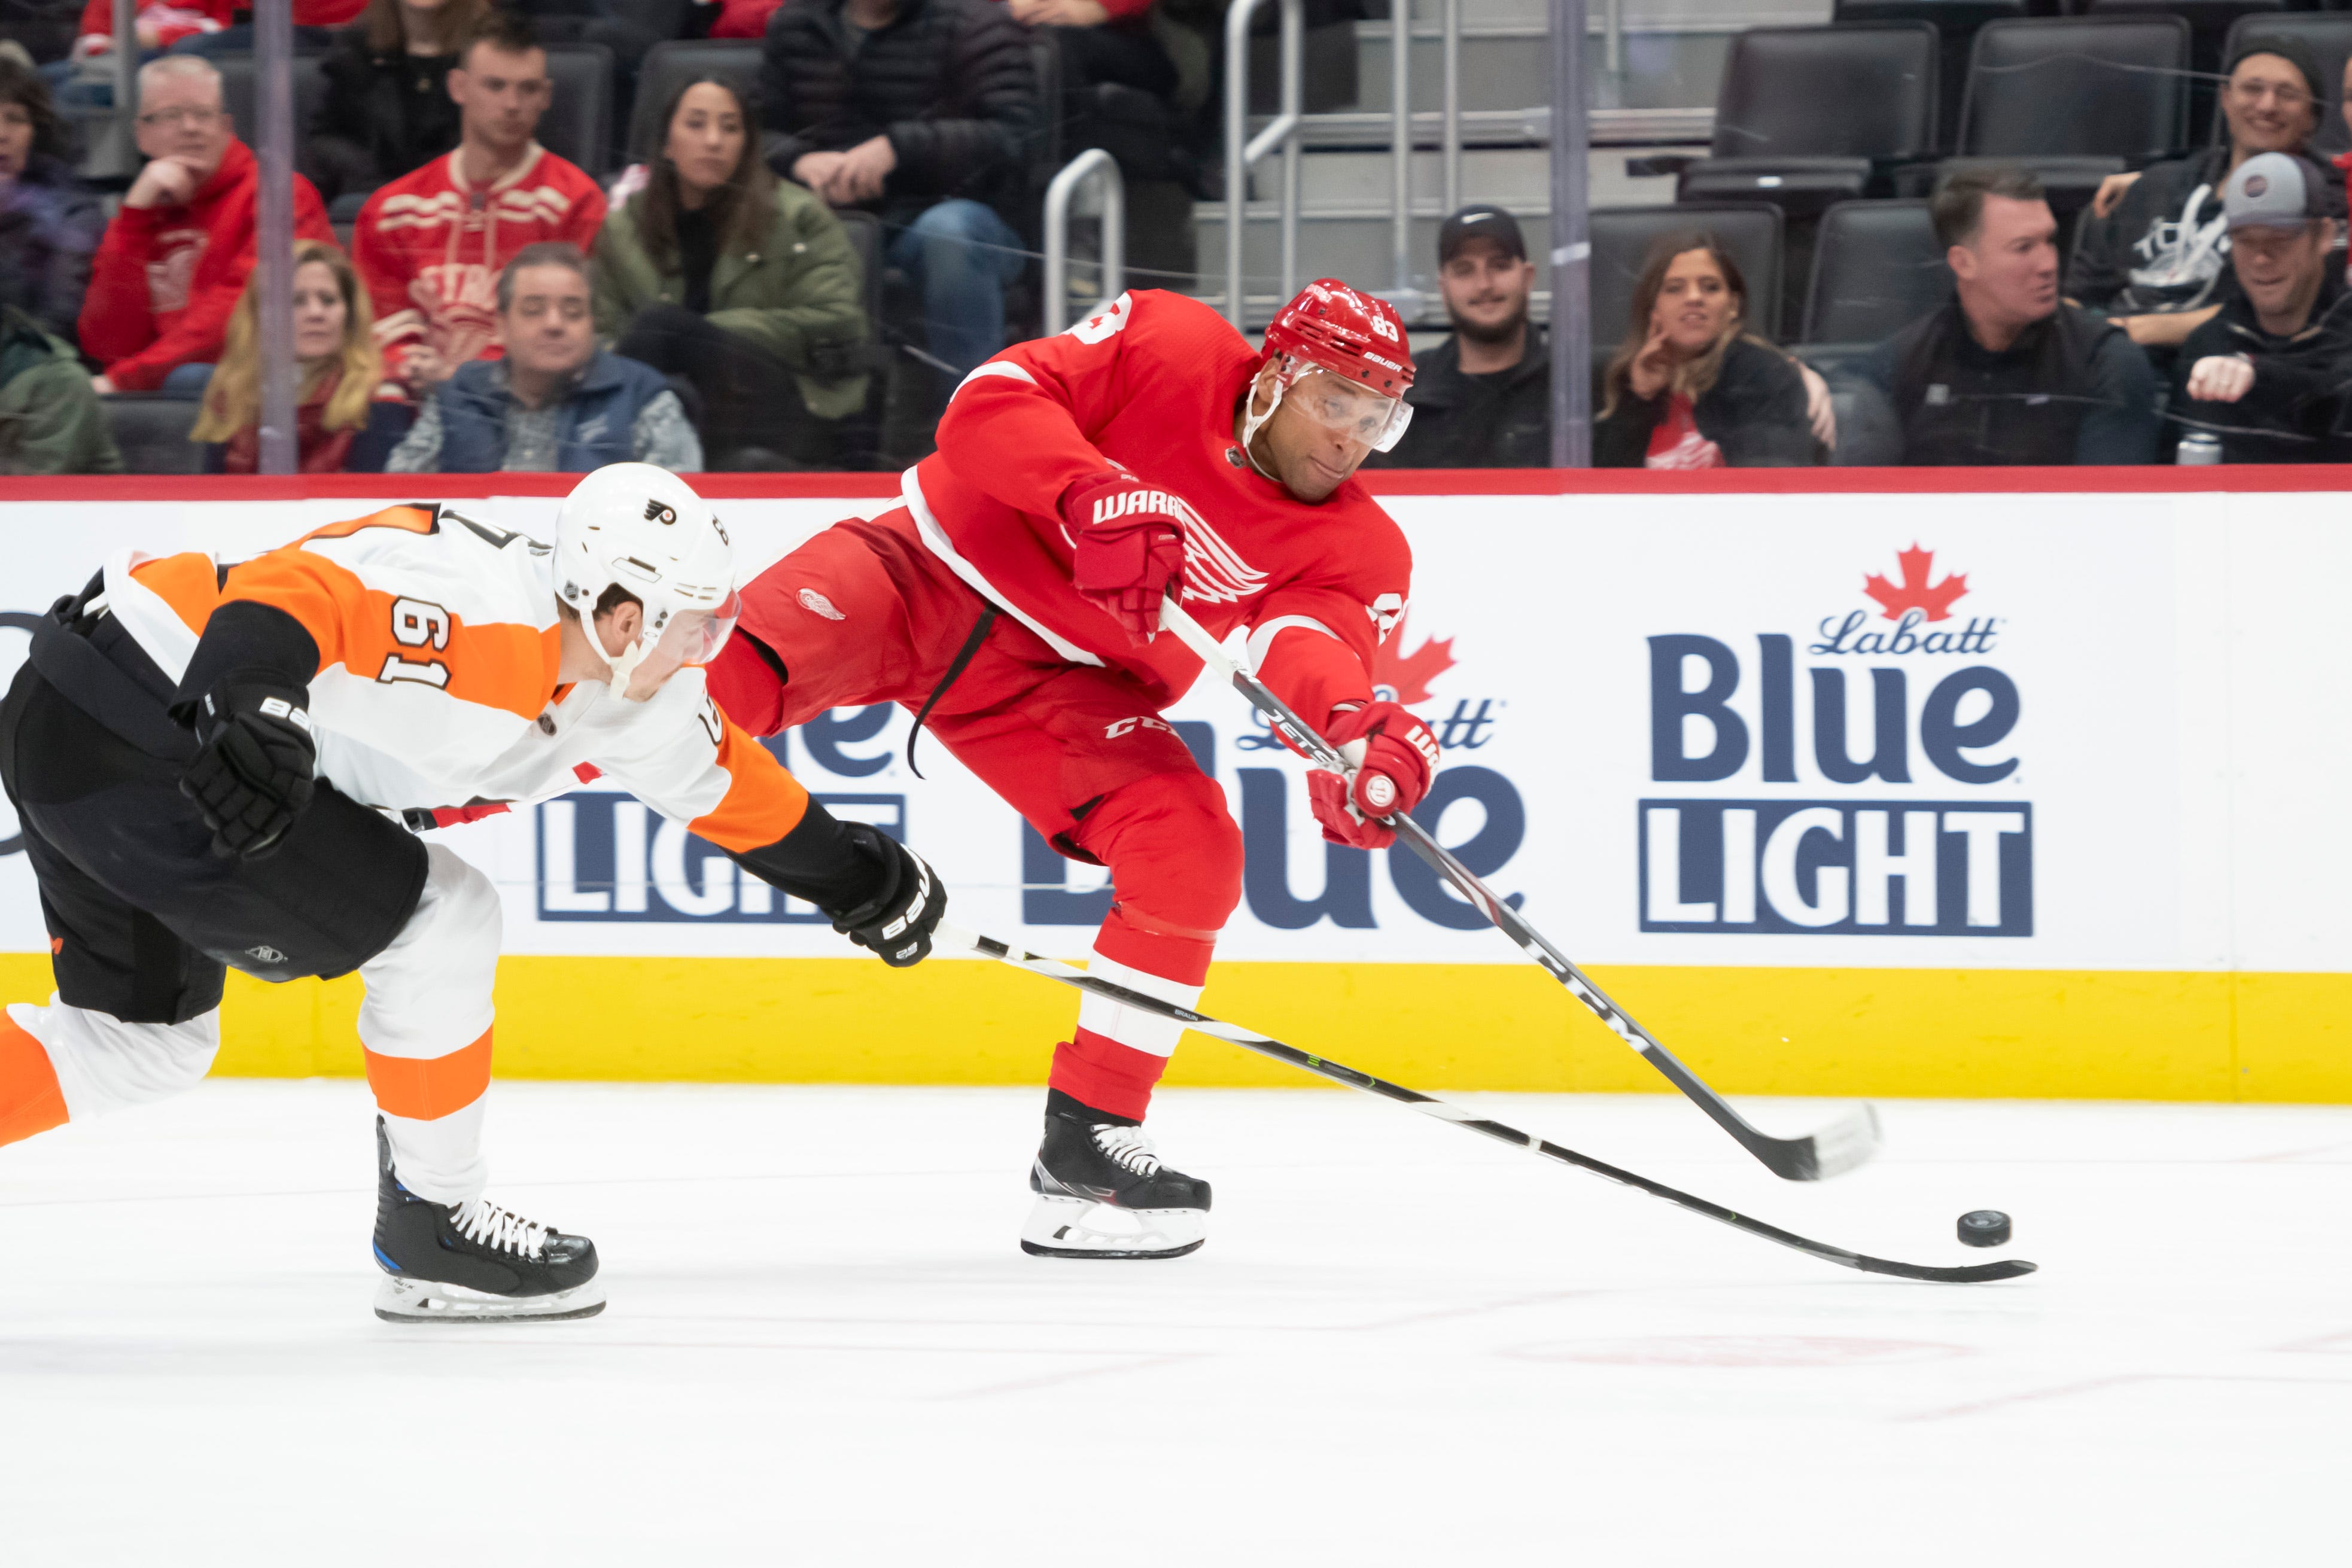 Trevor Daley – AGE: 36. CONTRACT: Unrestricted free agent. STATS: 43 games, 0 goals, 7 assists. COMMENT: Injuries plagued Daley for much of his three-year run with the Wings. Daley wasn’t nearly the player in Detroit he was elsewhere. GRADE: F.